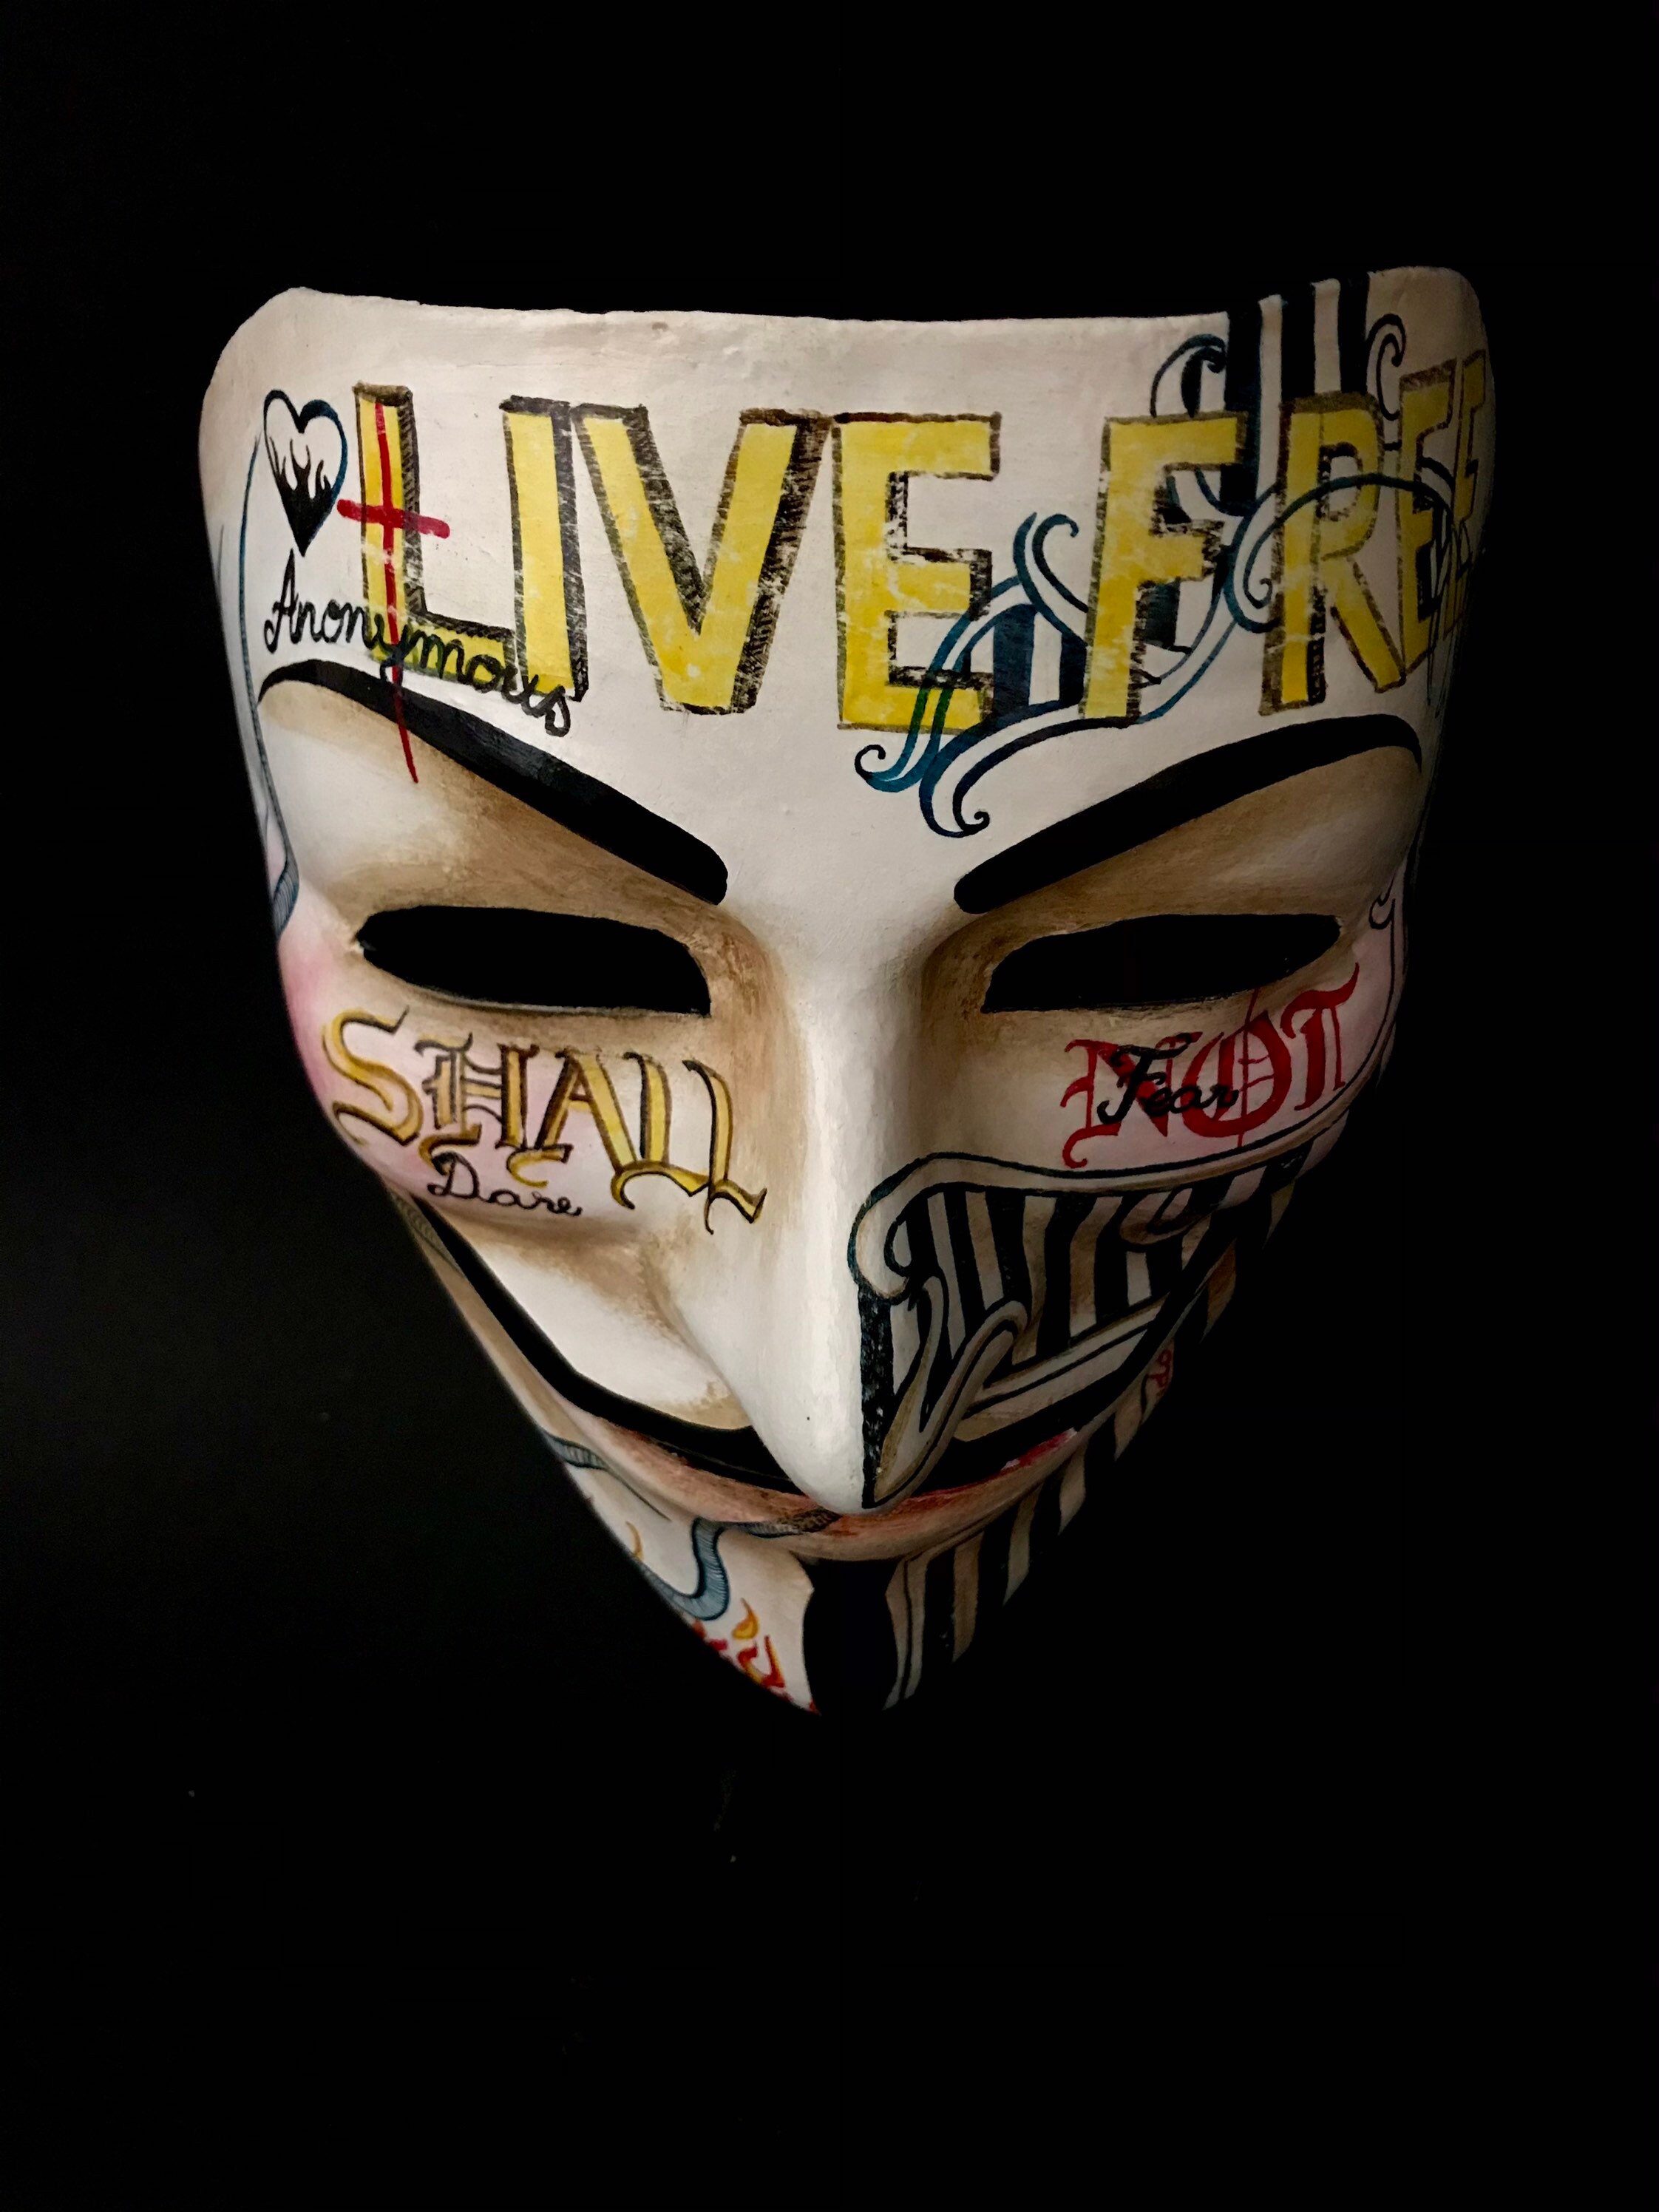 Spirit, Accessories, Anonymous Mask Guy Fawkes Mask Brand New